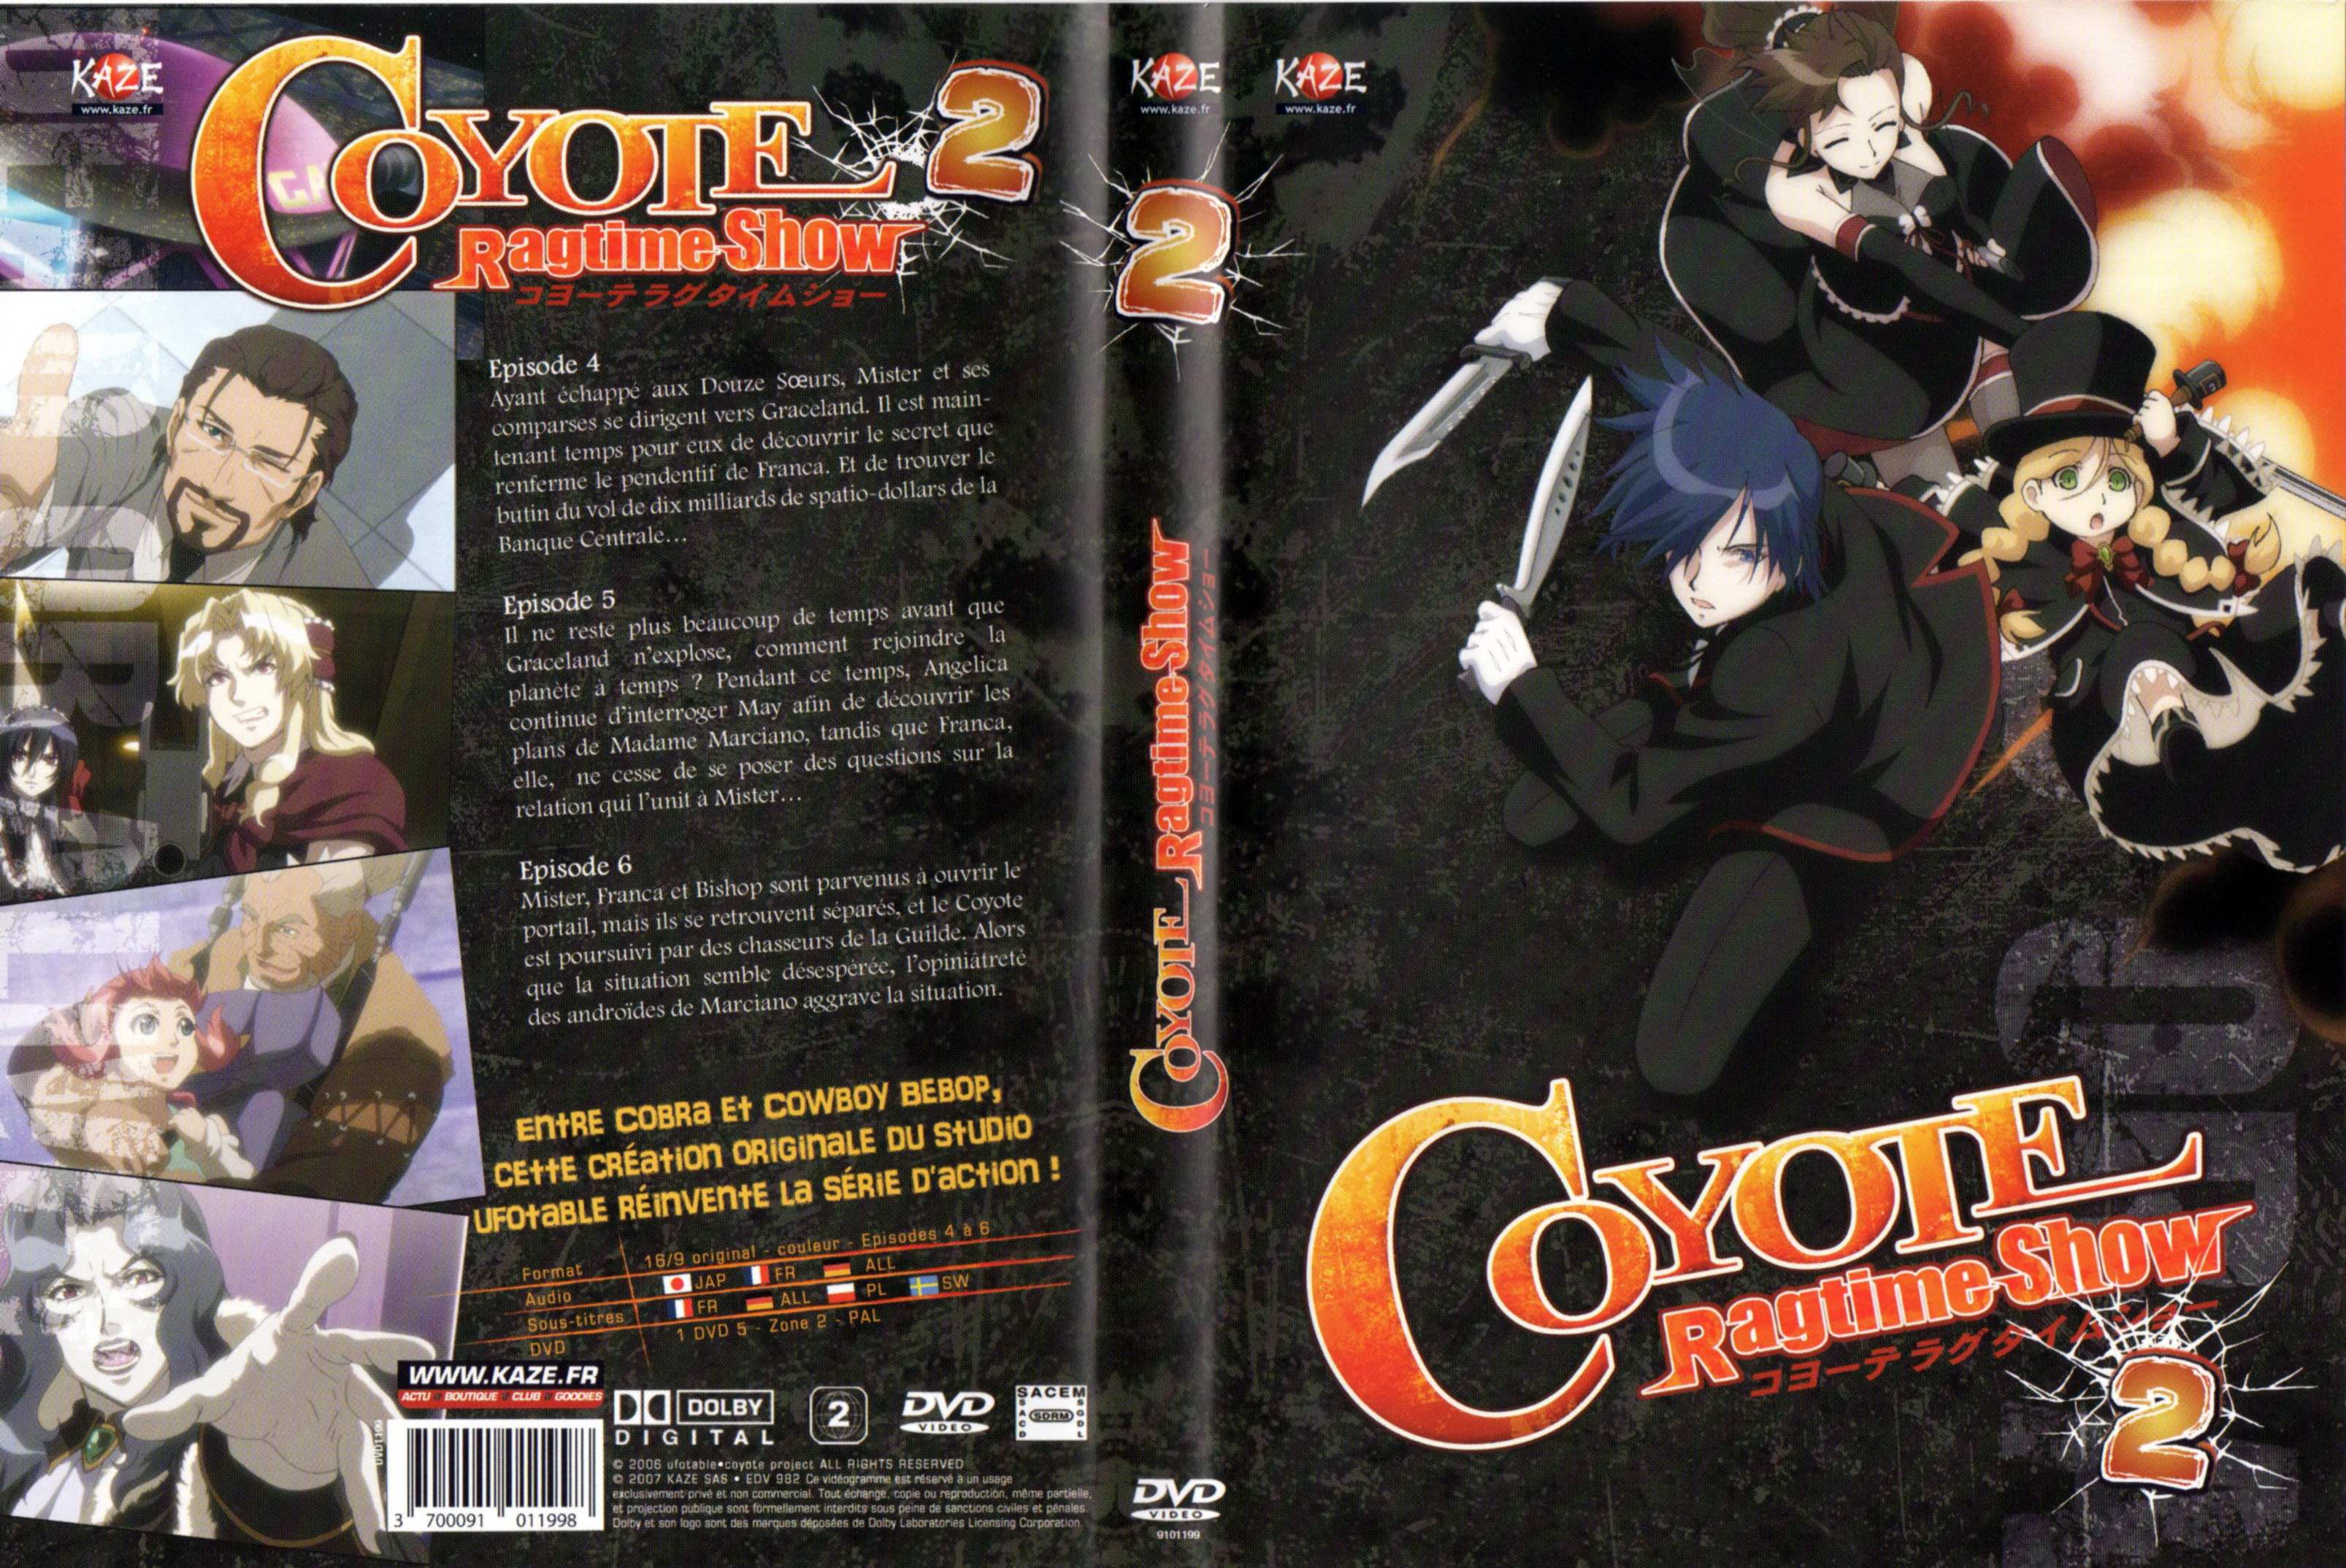 Jaquette DVD Coyote ragtime show vol 2